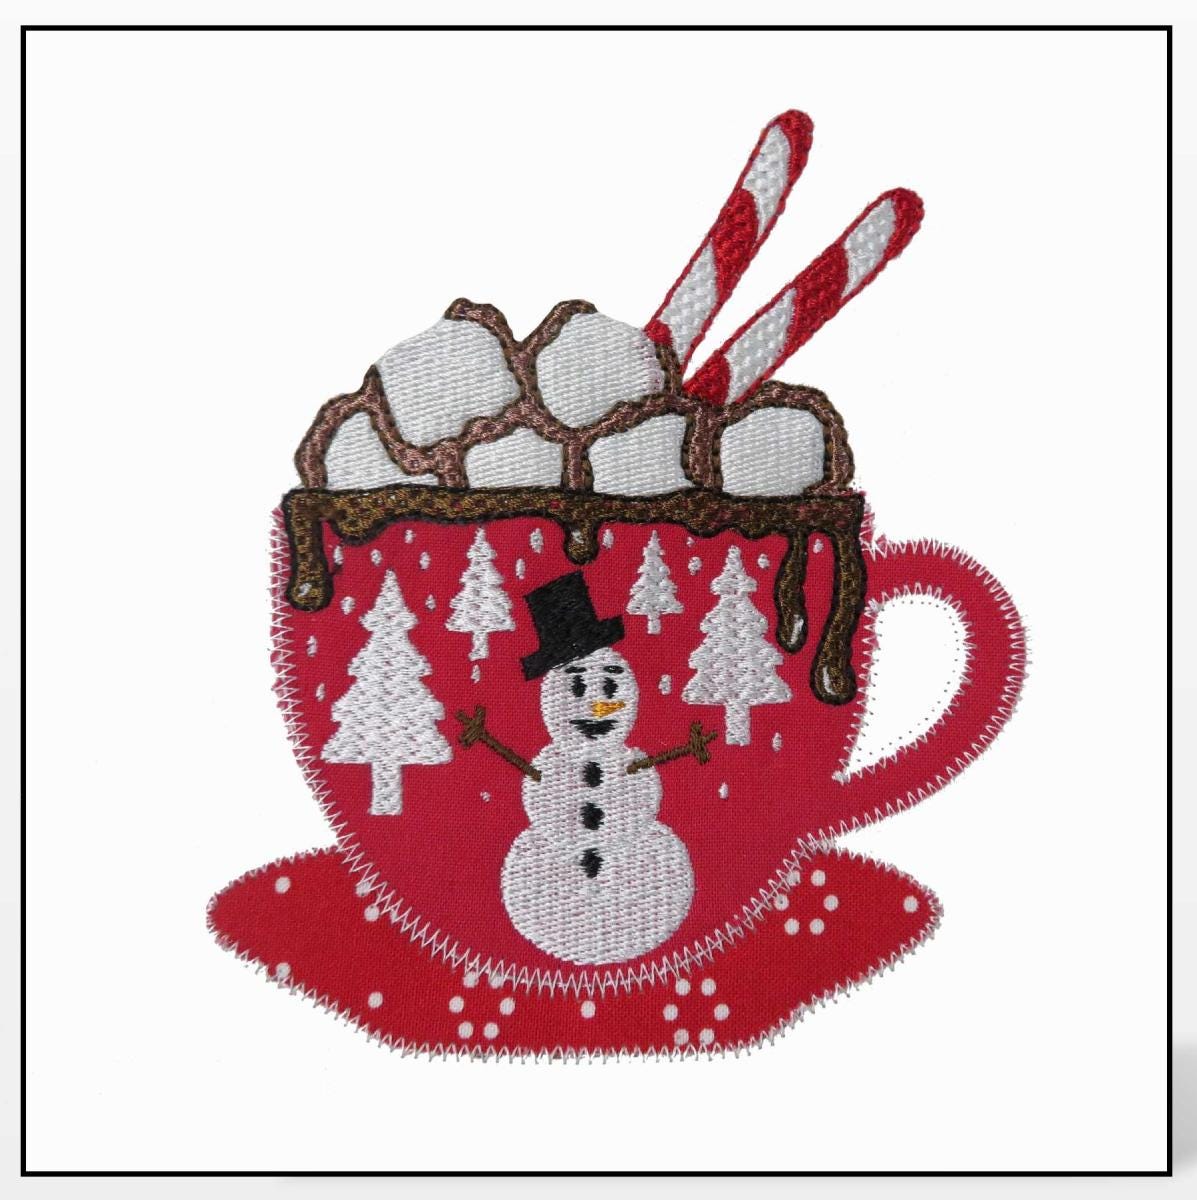 GO! Peppermint and Hot Cocoa Embroidery Specialty Designs